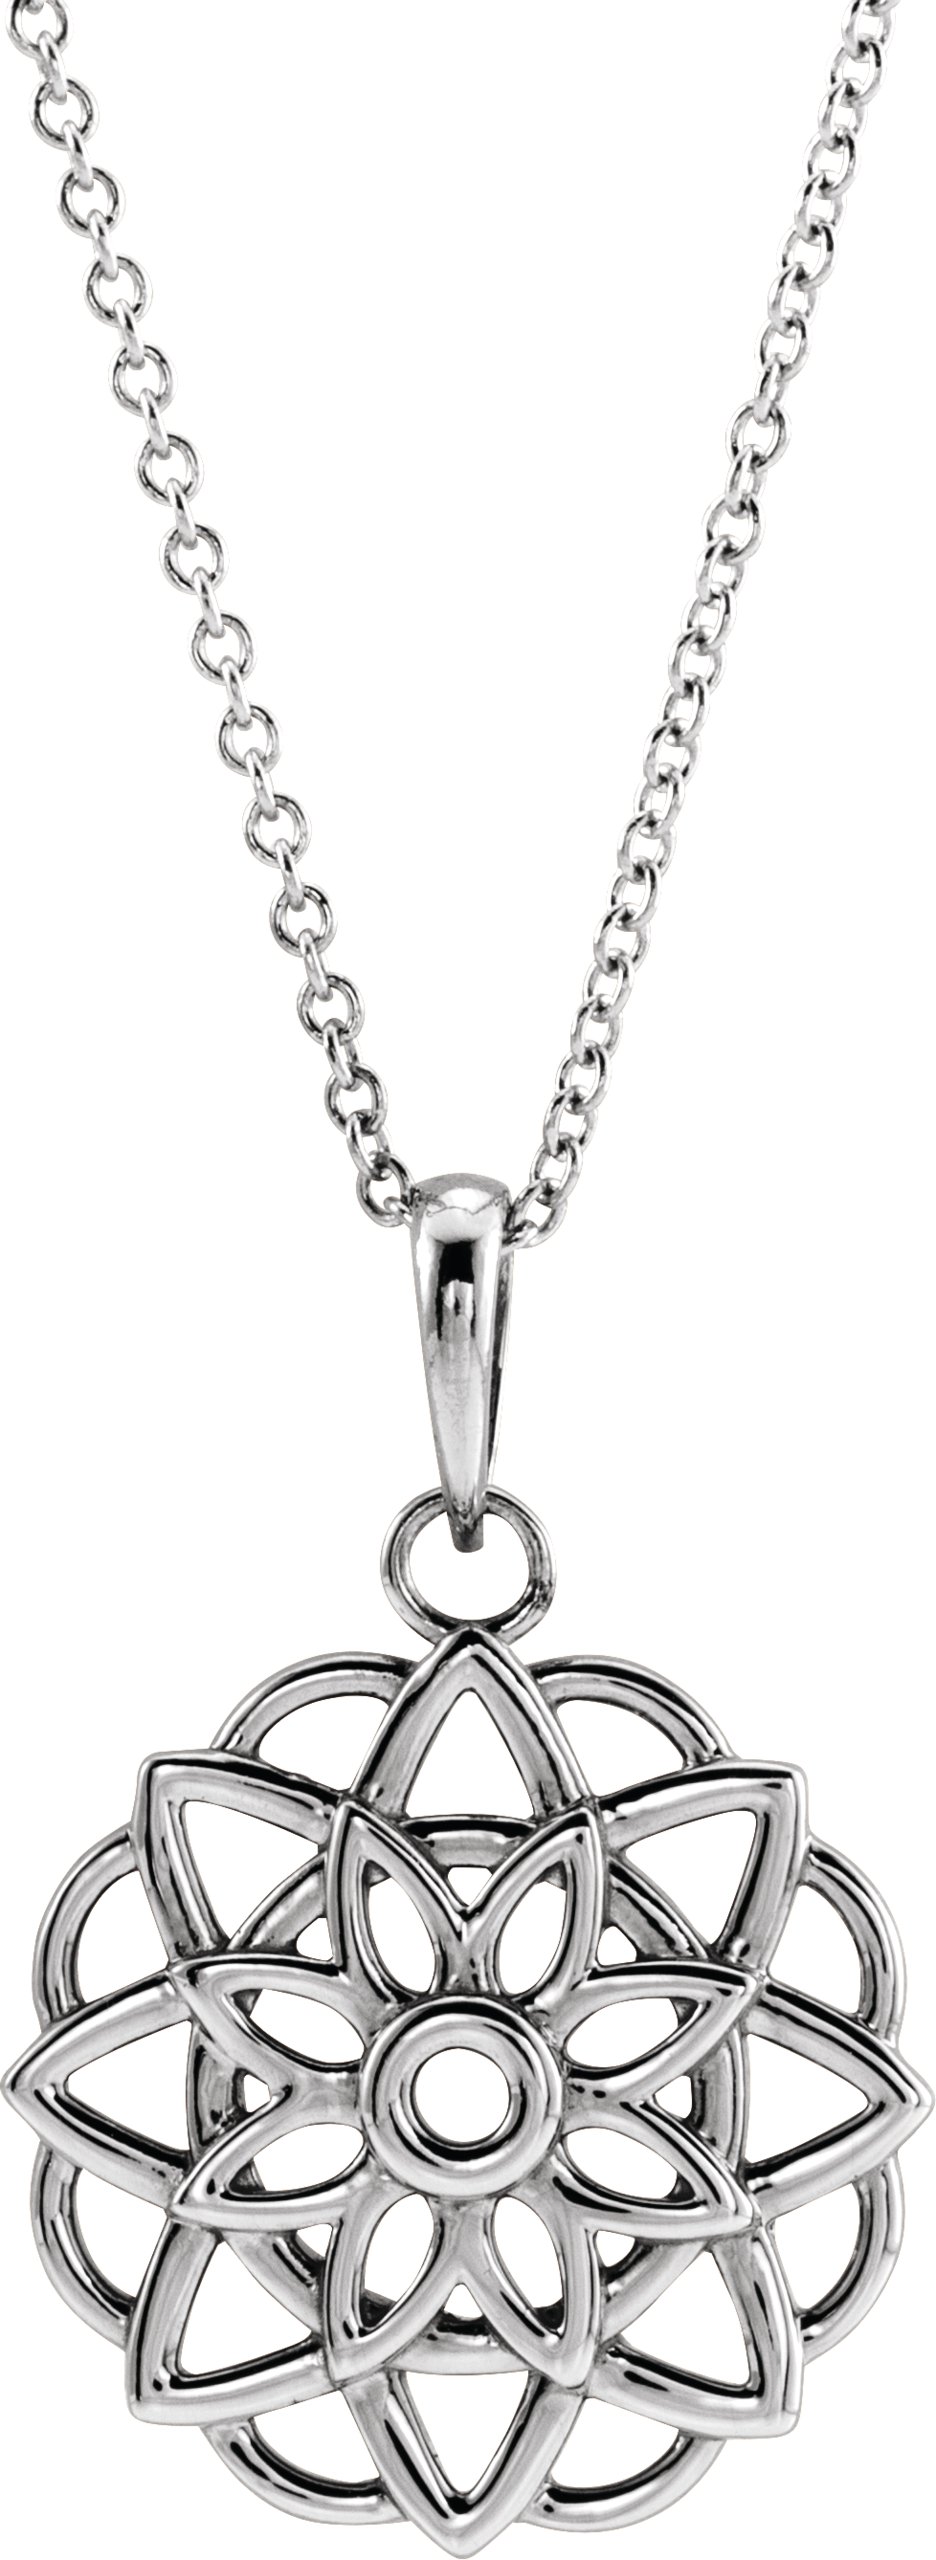 Sterling Silver Floral 16-18" Necklace